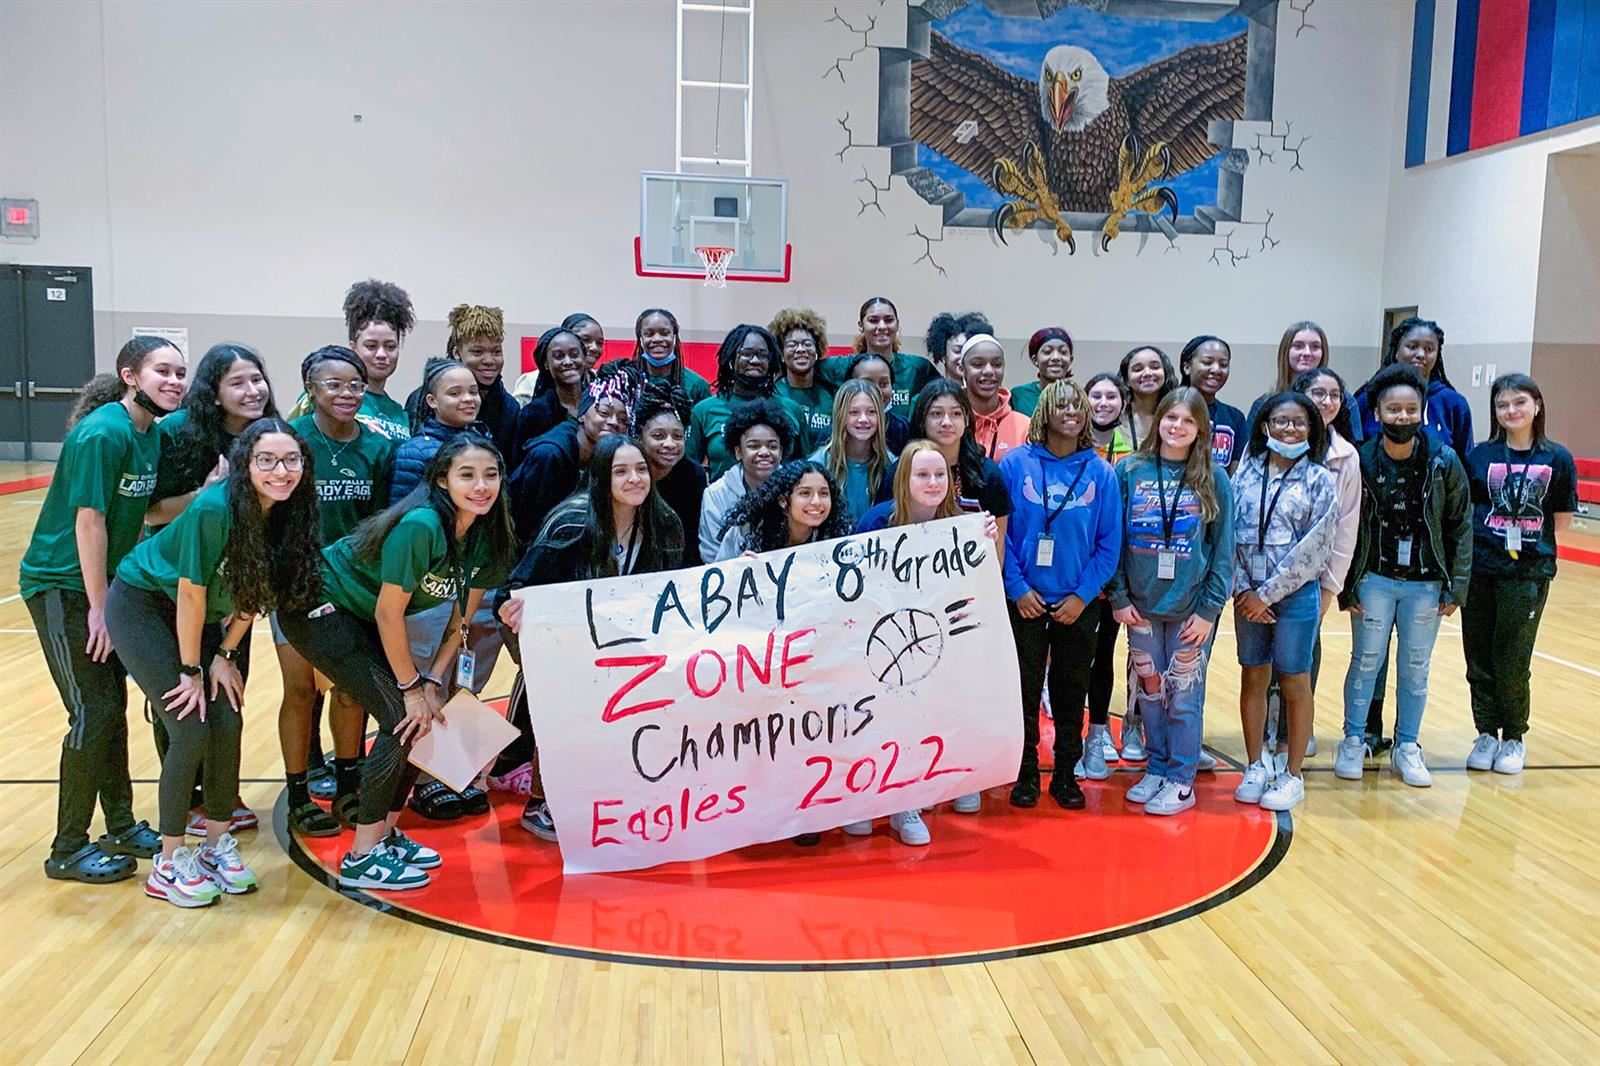 The Labay Eagles’ eighth grade girls’ basketball teams each won their respective division titles.